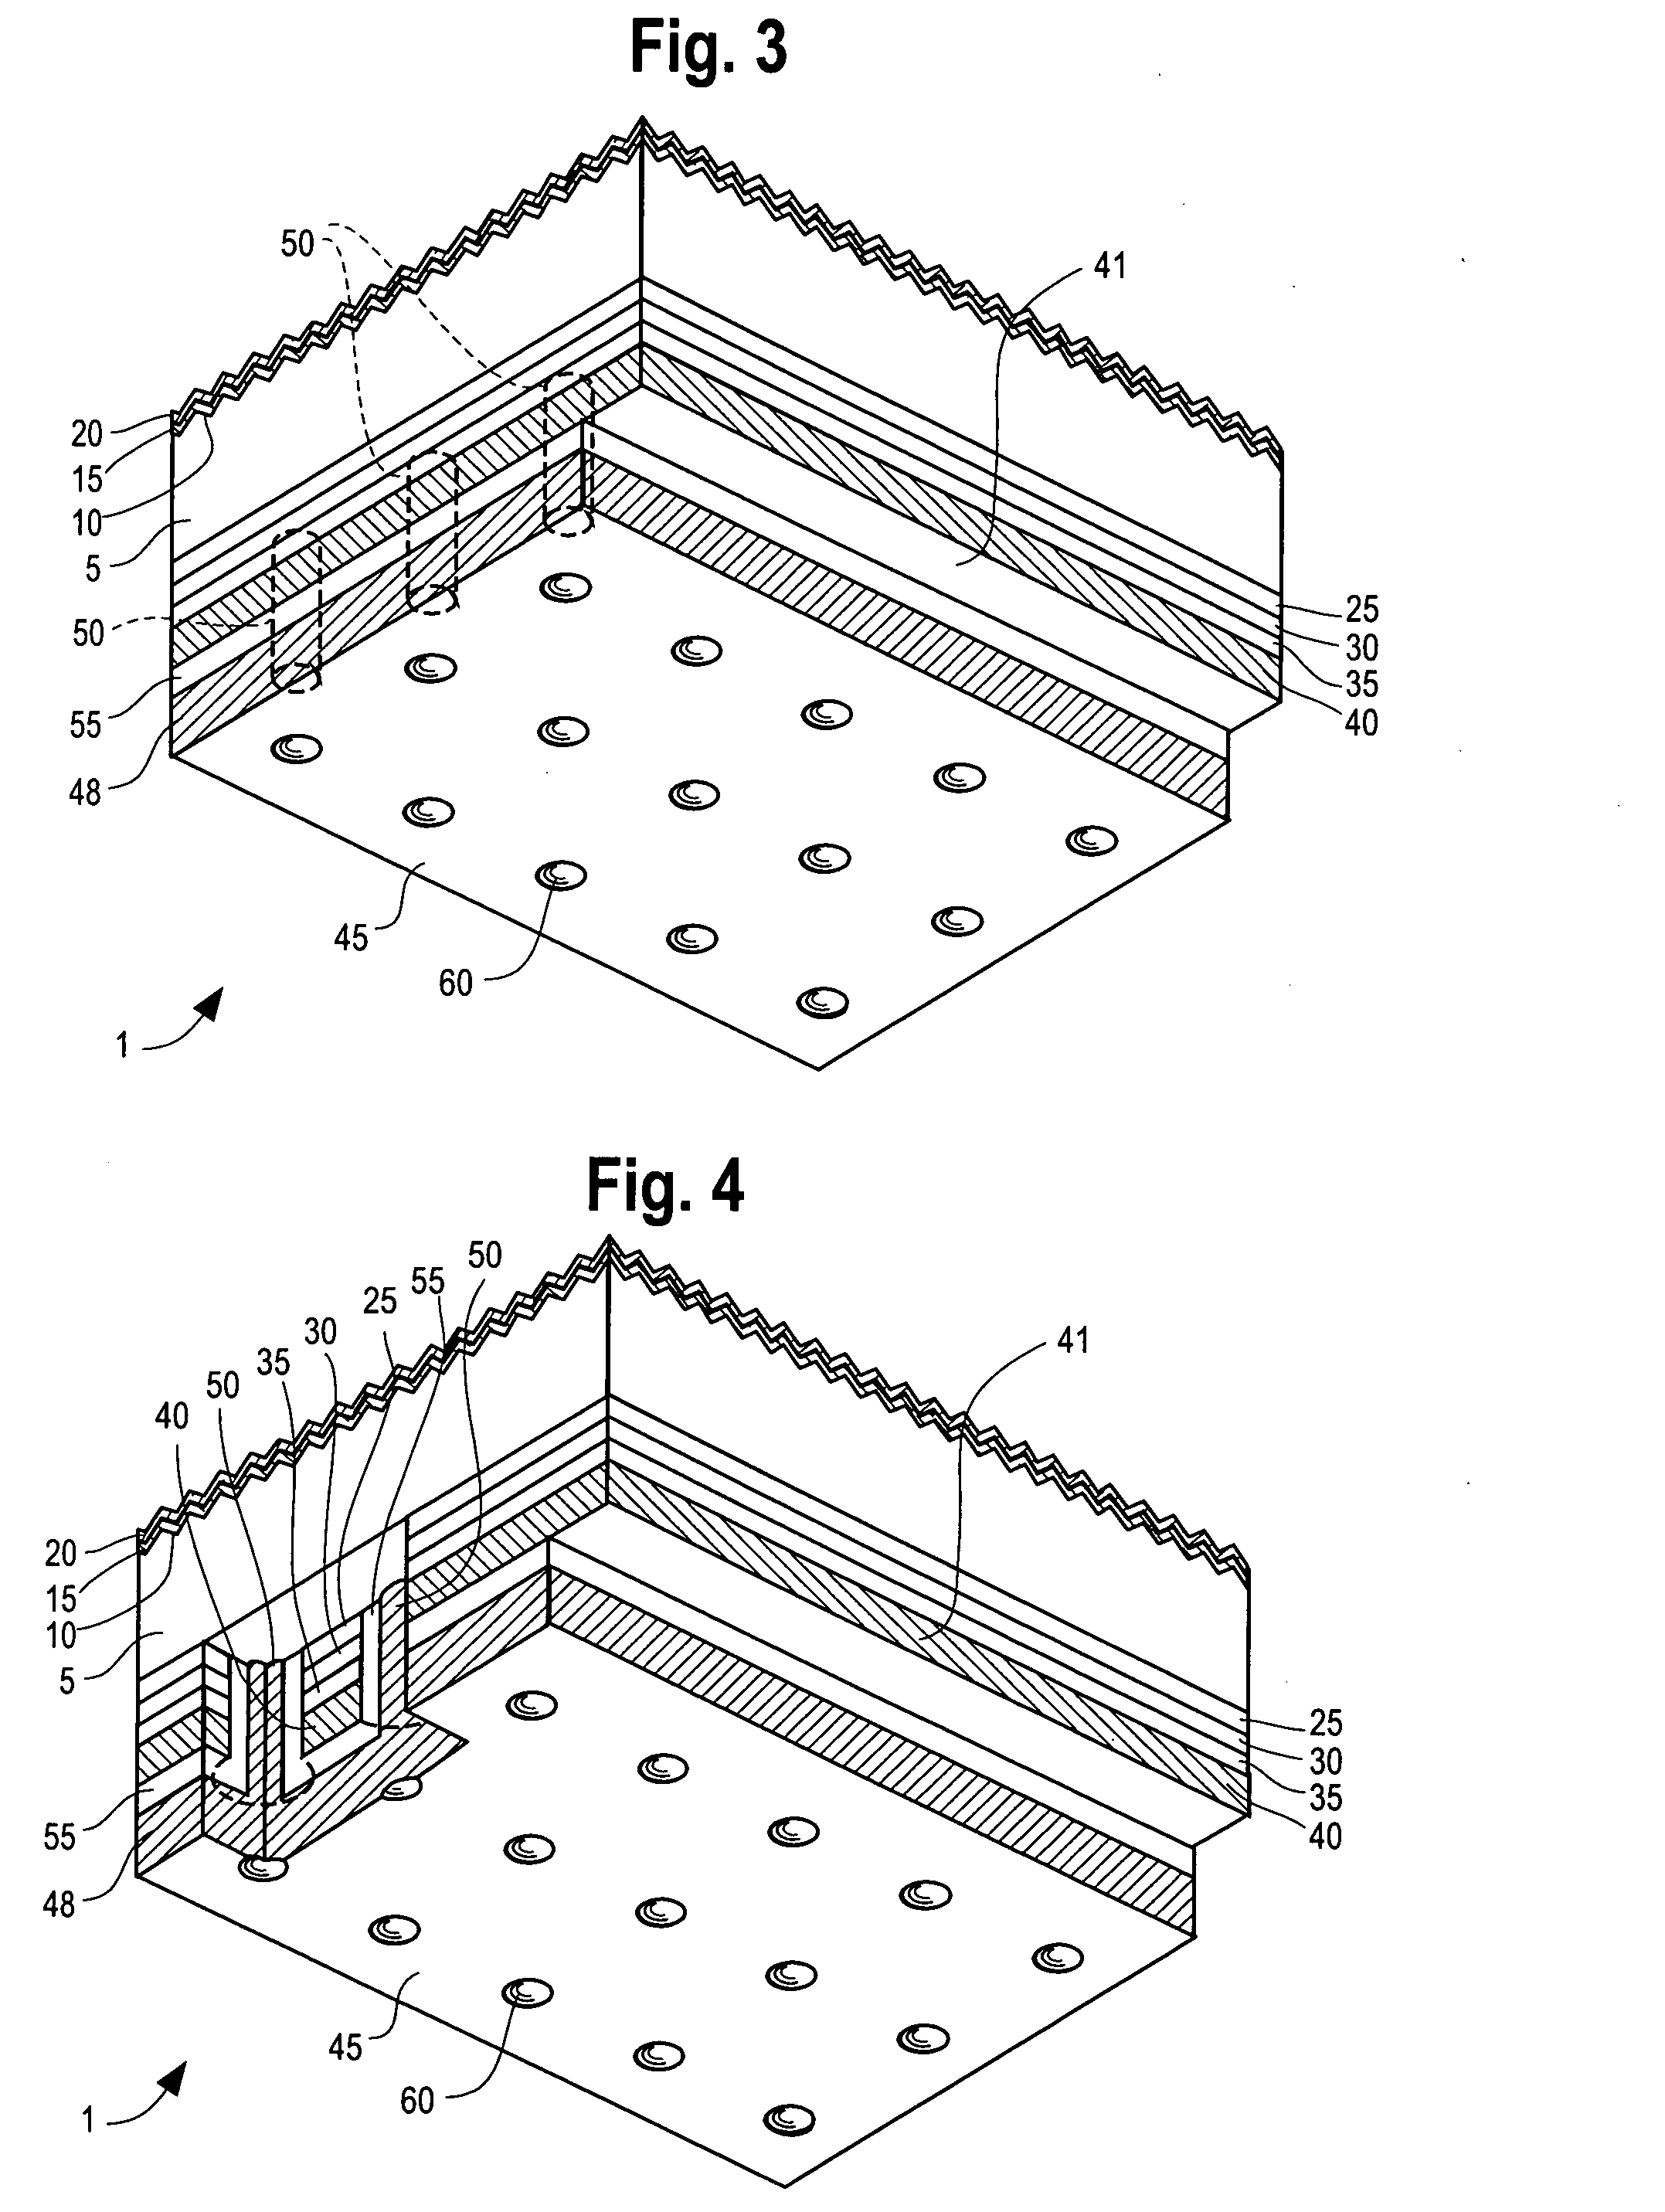 Back-contact photovoltaic cells